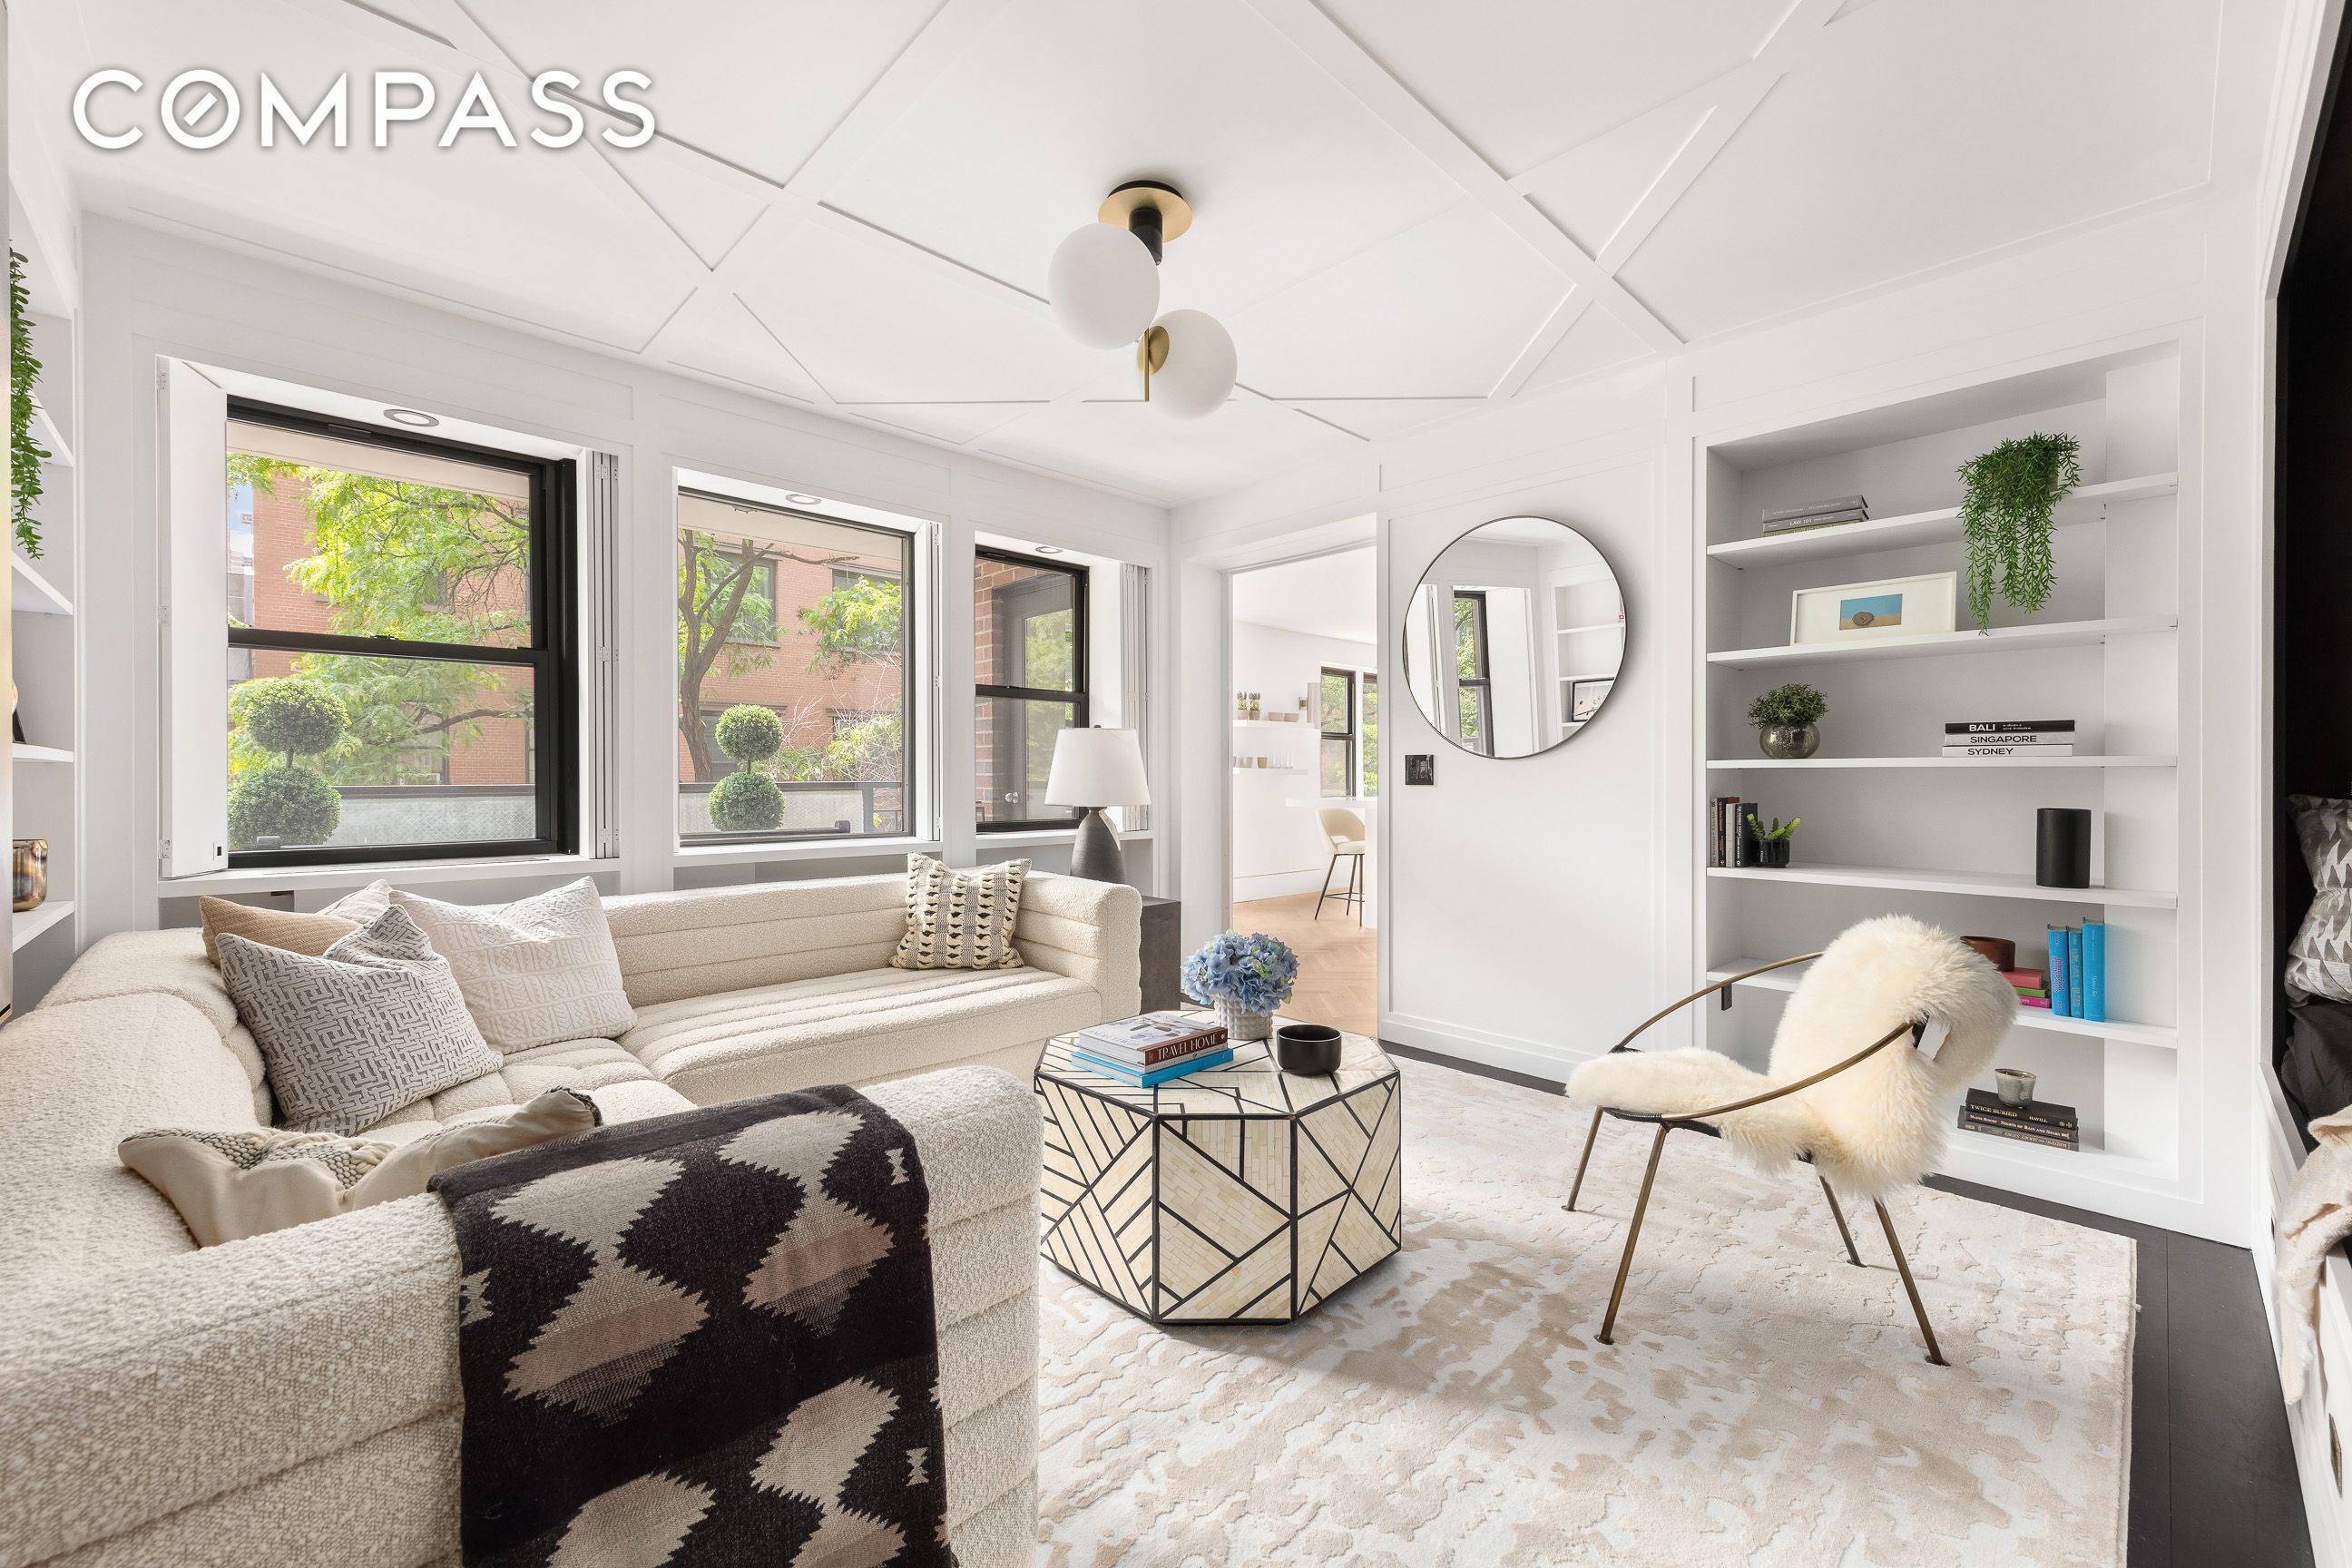 A key to Gramercy Park, south facing outdoor space, and a fully renovated home.